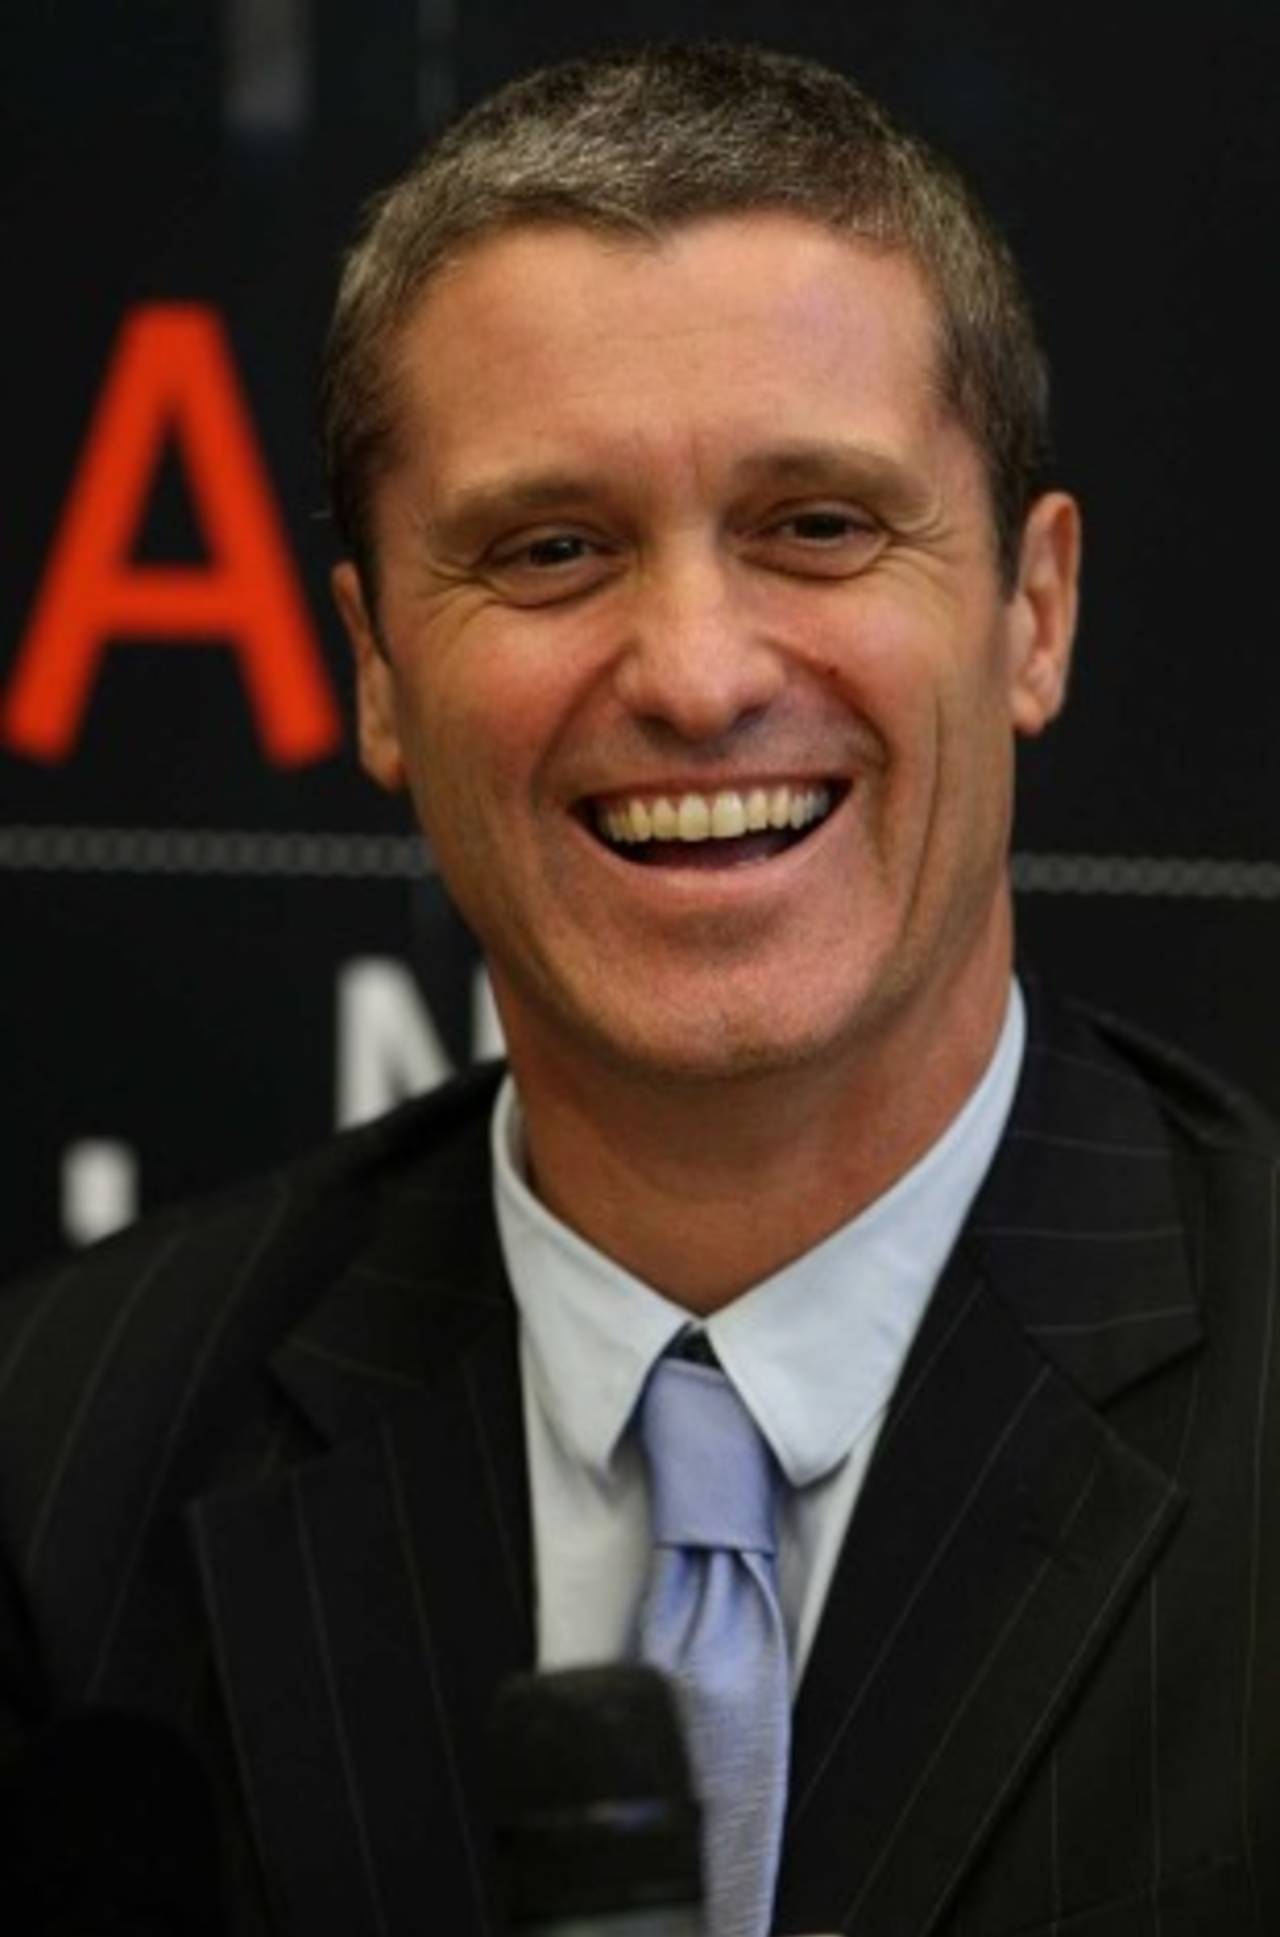 New Zealand Cricket CEO Justin Vaughan is all smiles at a press conference, Auckland, June 21, 2011